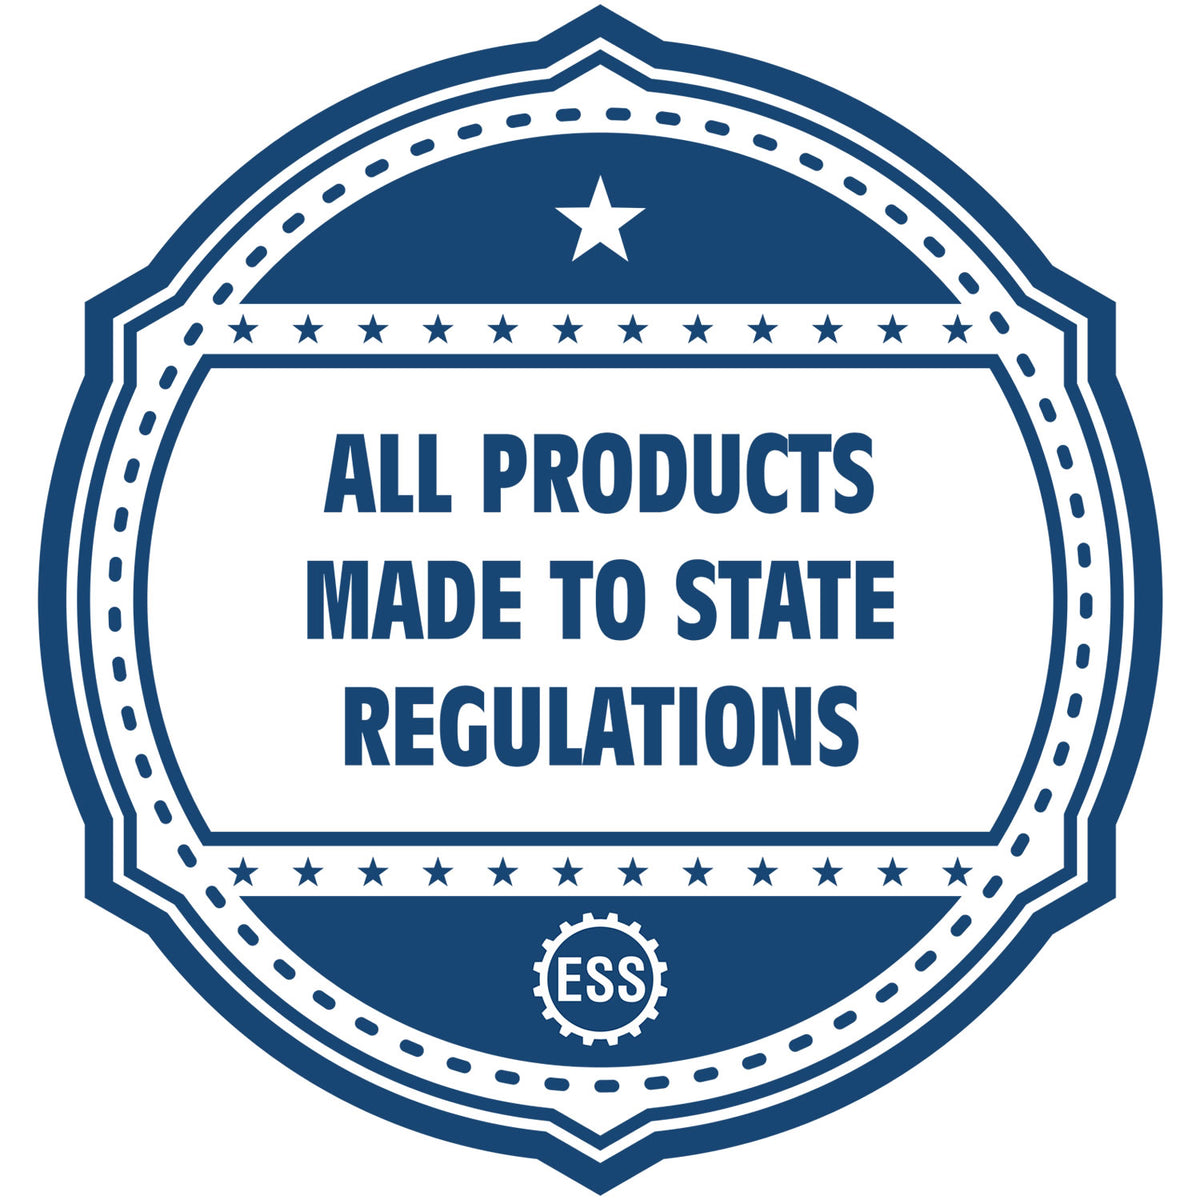 An icon or badge element for the Soft West Virginia Professional Engineer Seal showing that this product is made in compliance with state regulations.